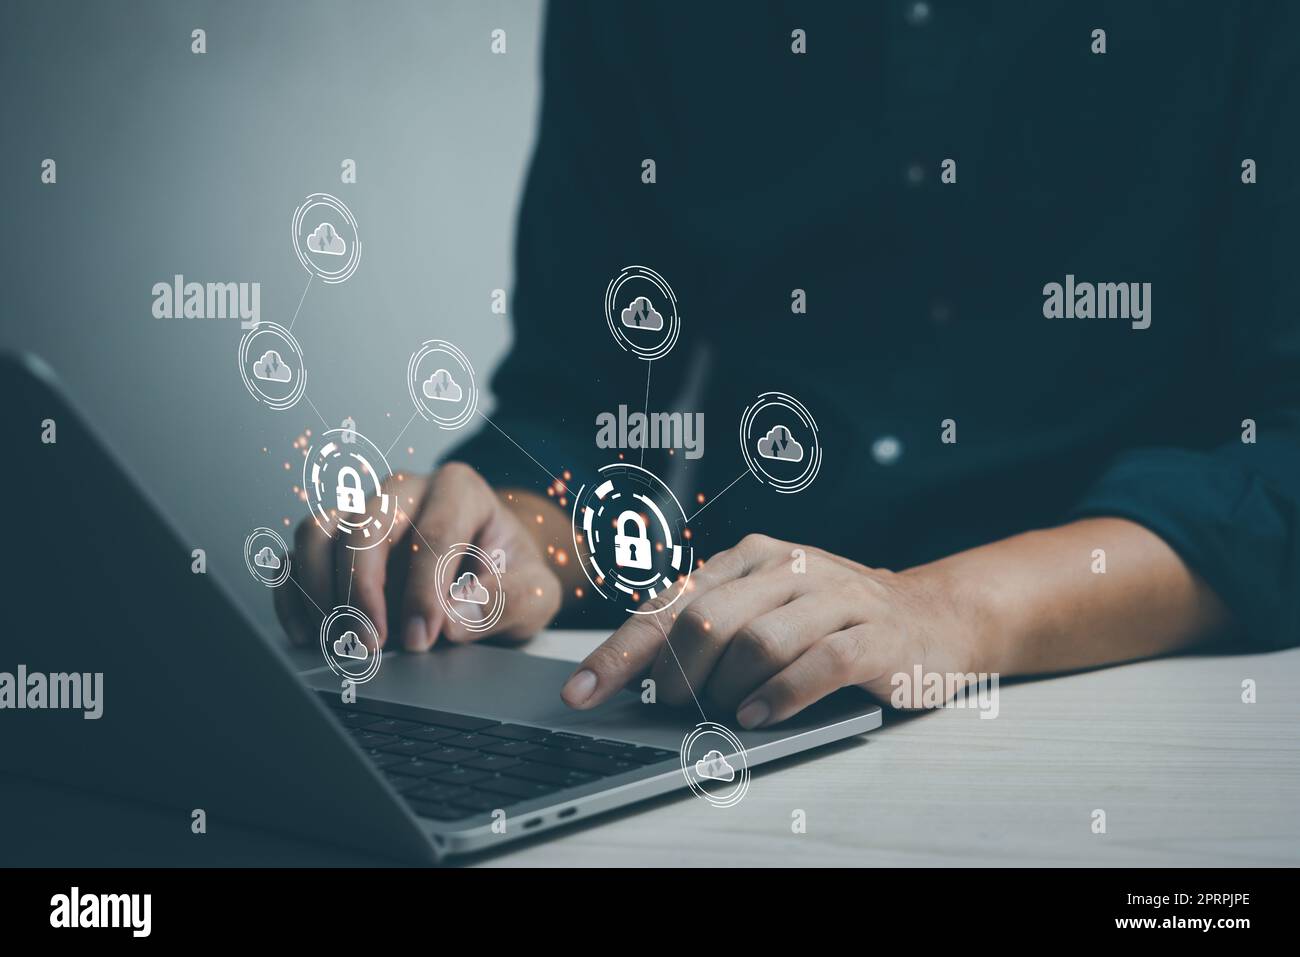 Cloud network storage Computer online technology for computer business virtual cloud service icons and hands on laptop keyboard Data transfer technology concept. Stock Photo